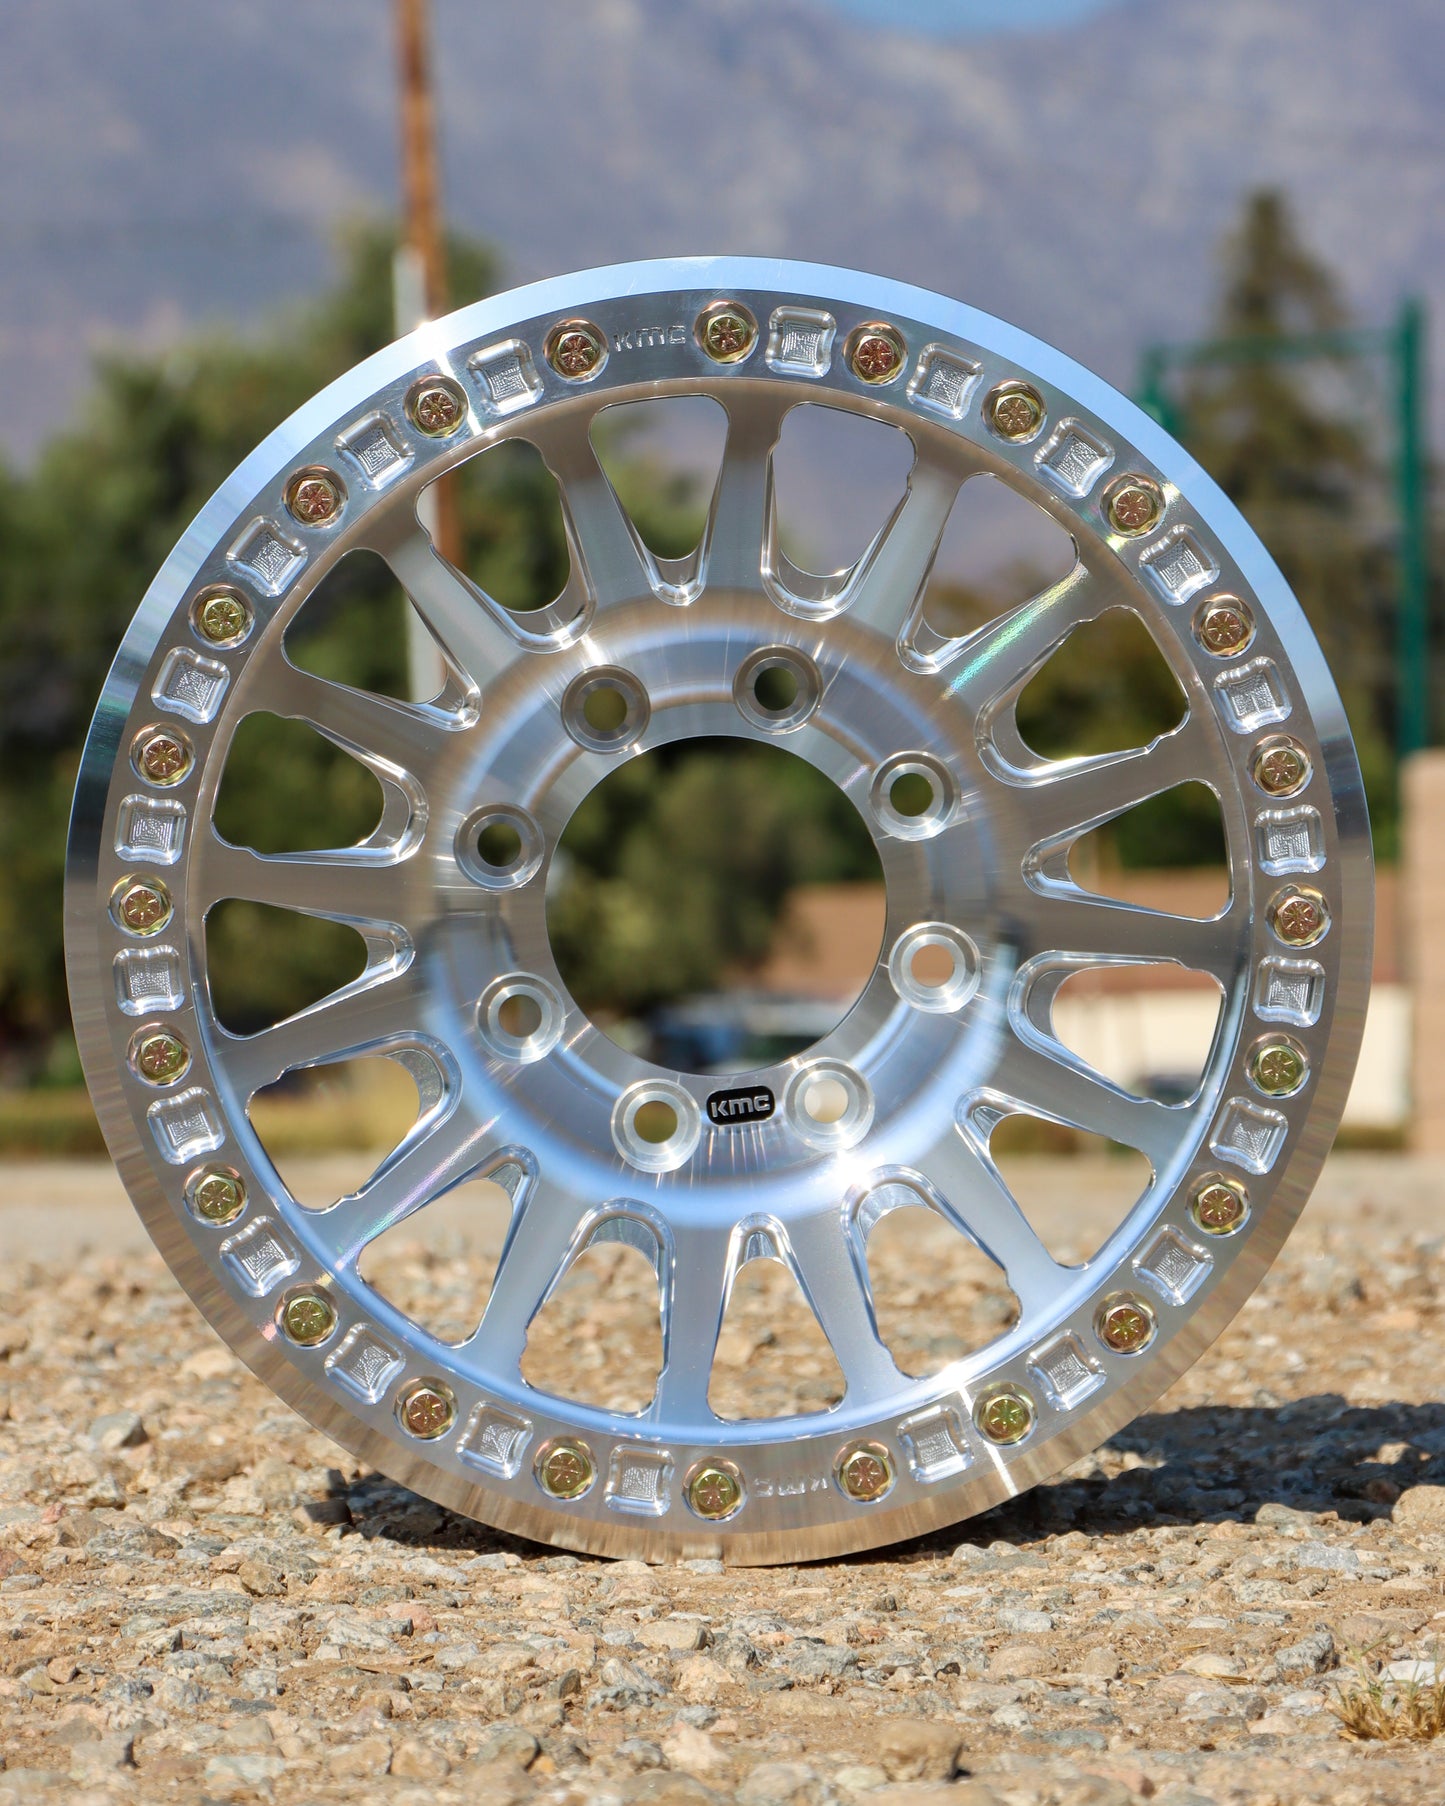 8 Lug KMC impact forged bead lock wheel sitting on some gravel with the mountains and trees in the background.